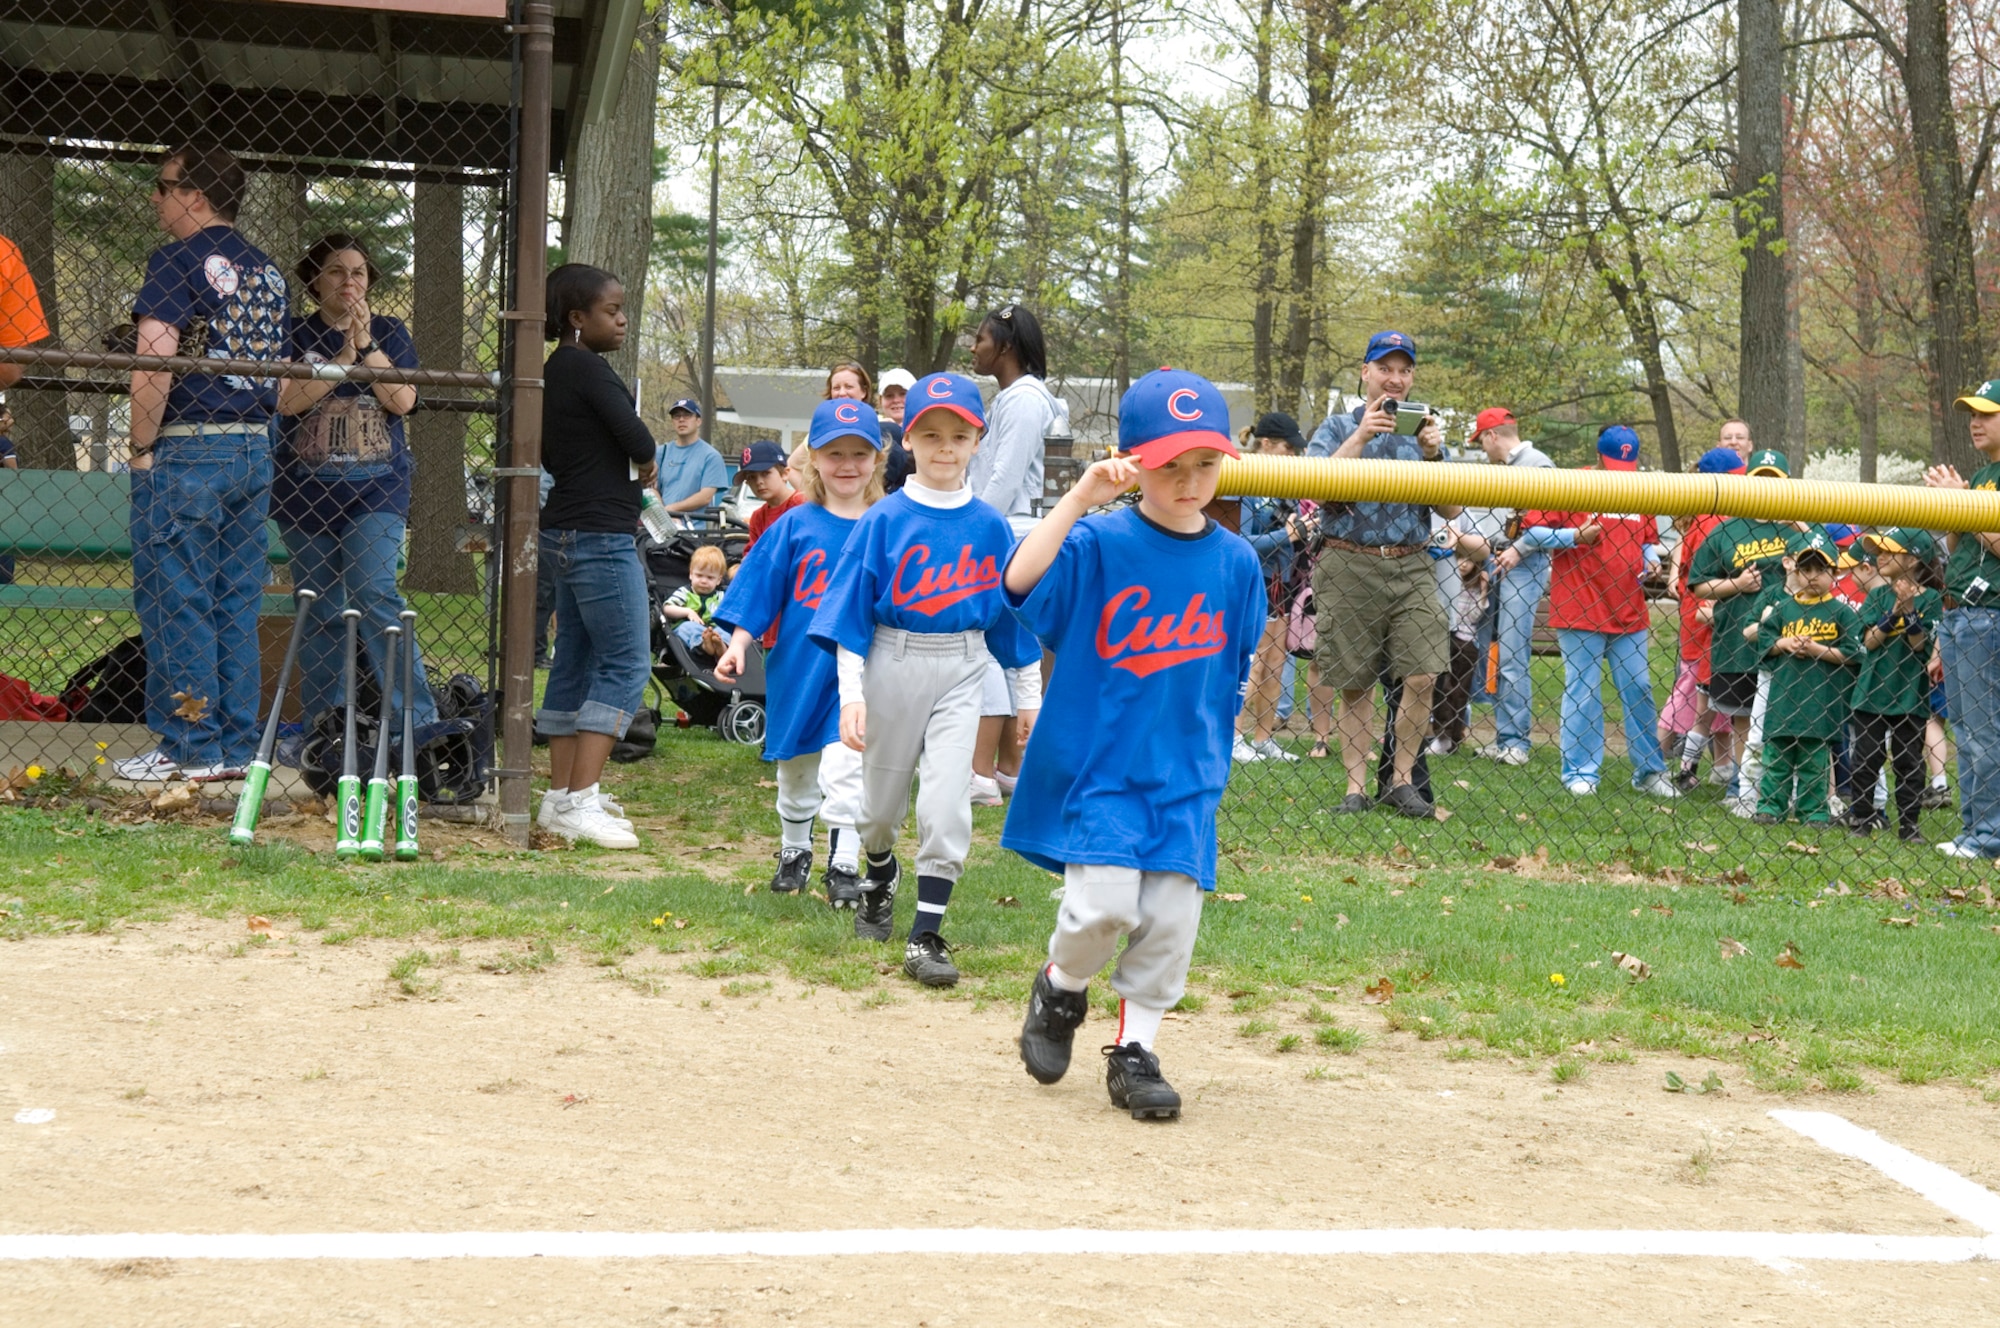 HANSCOM AIR FORCE BASE, Mass. –The Cubs take the field during the Hanscom Little League season opener on May 2. Col. Dave Orr, 66th Air Base Wing commander was on hand to throw out the first pitch of the season. (U.S. Air Force photo by Rick Berry)